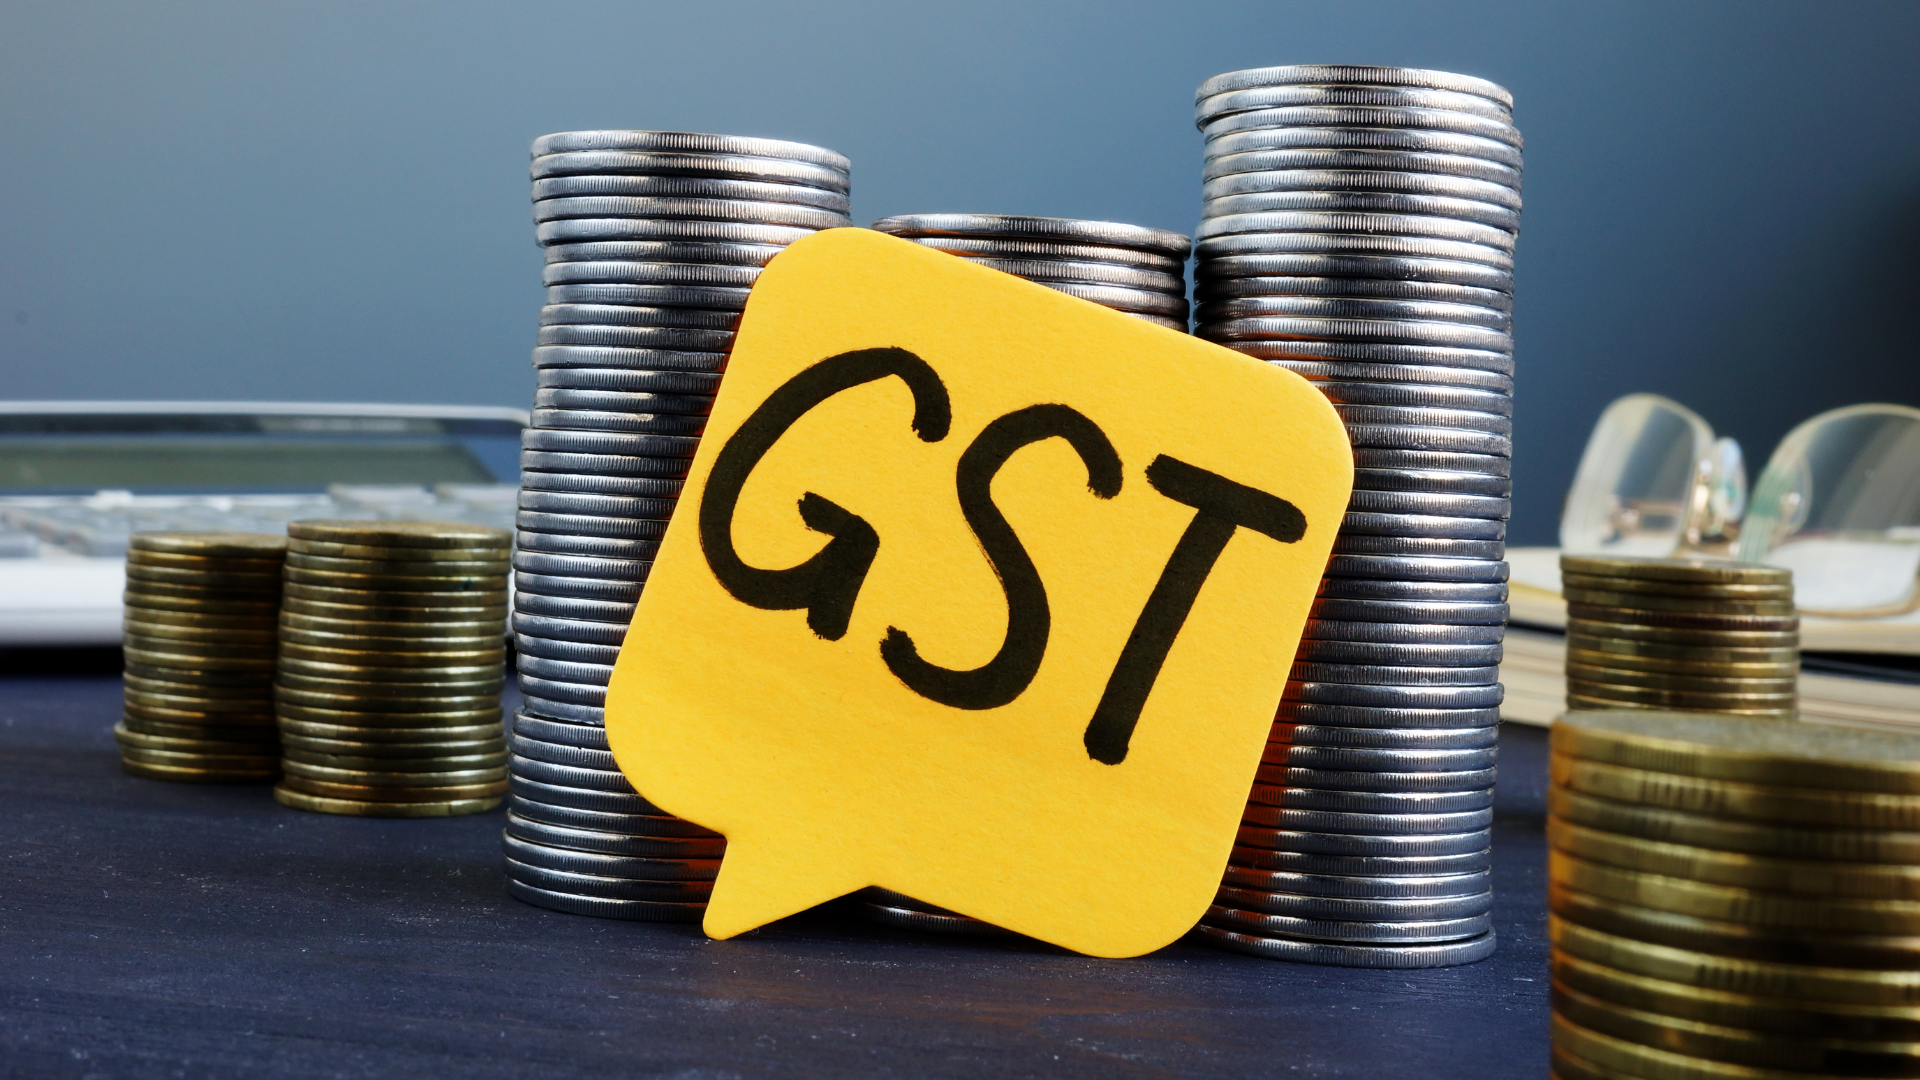 Maharashtra powers national GST mop-up - Times of India